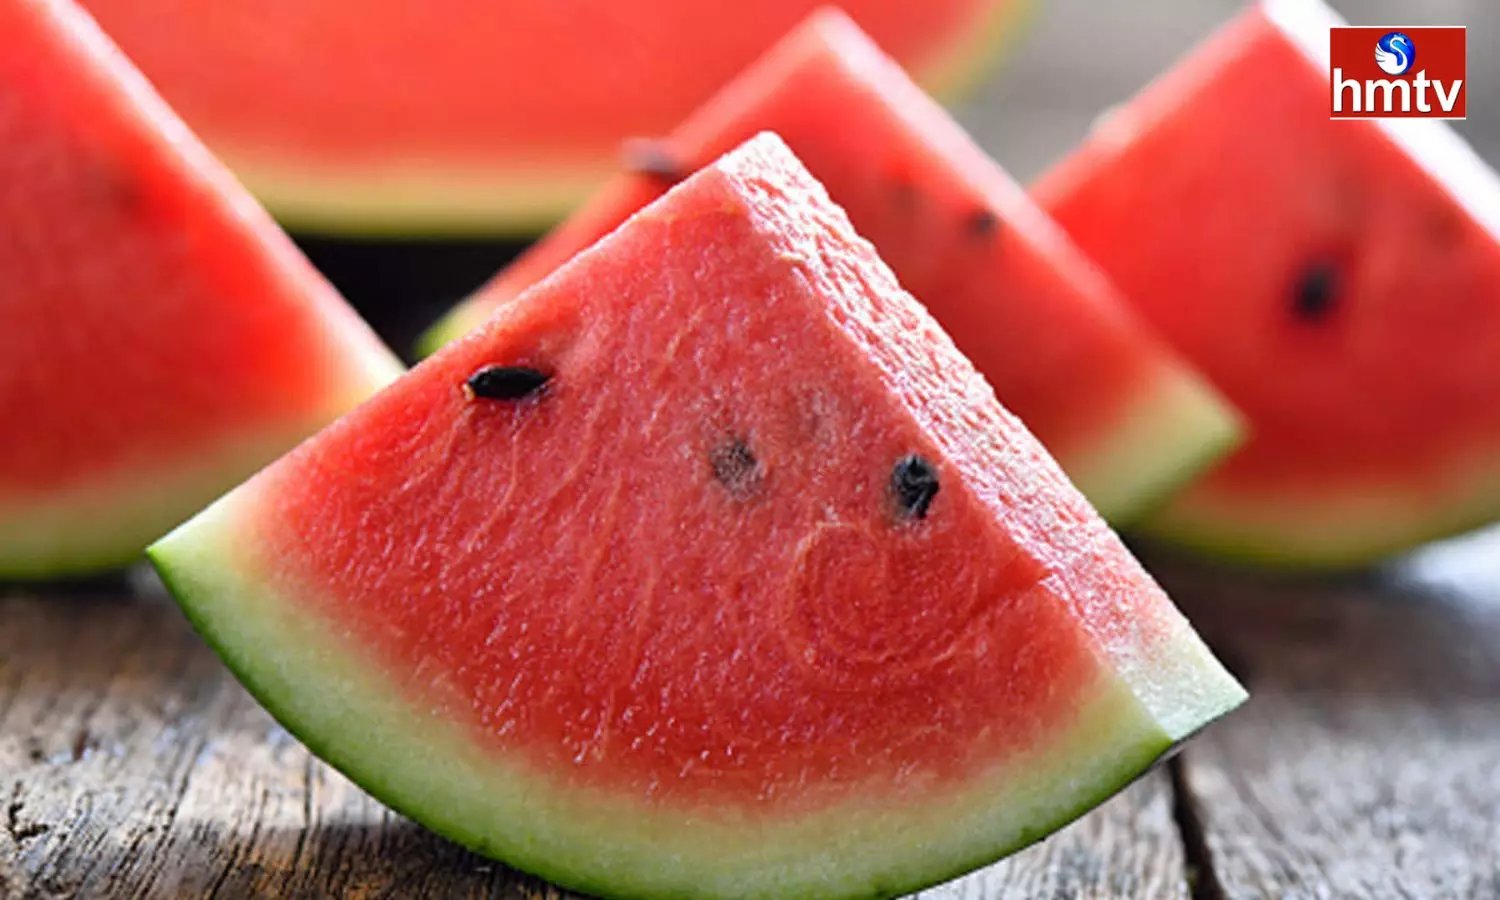 Know the Side Effects of Watermelon